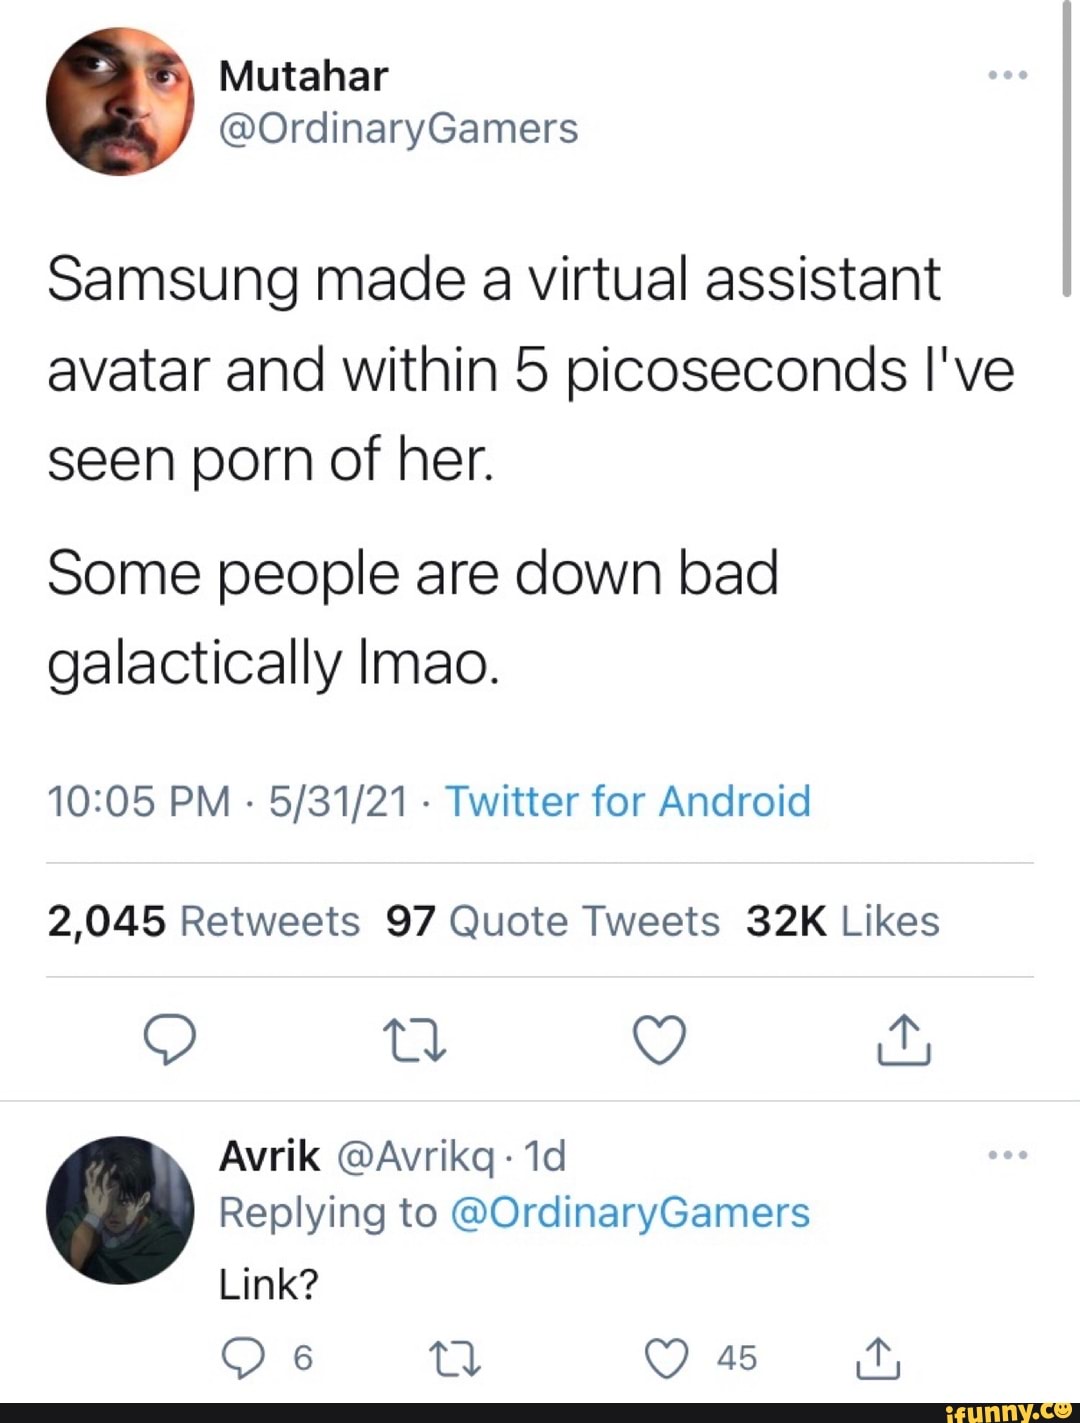 What did Samsung do to virtual avatar Sam? We don't want the weird